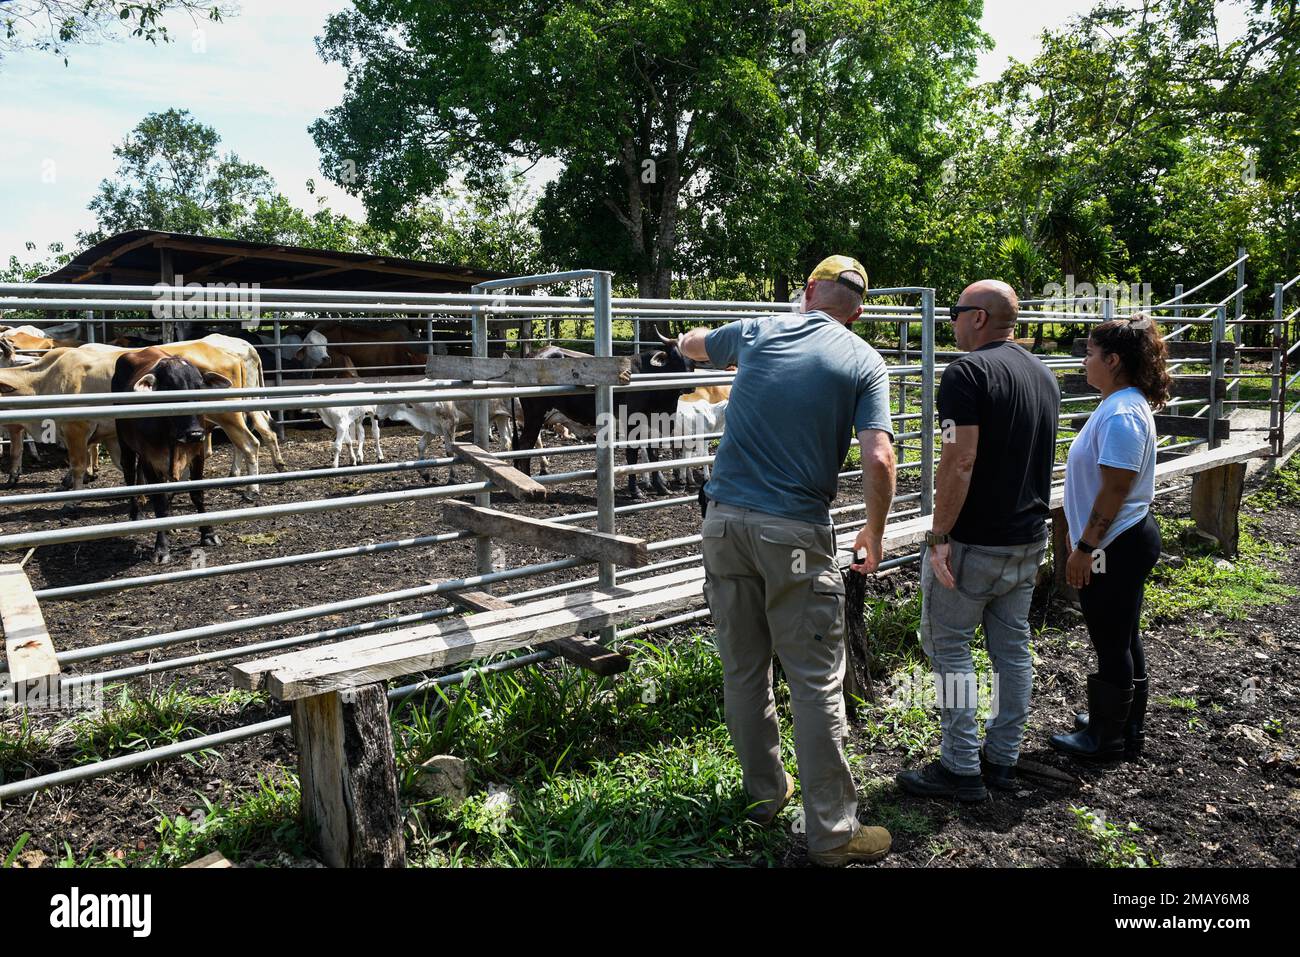 U.S. Army veterinarians and veterinary technicians from the 109th Medical Detachment Veterinary Services plan vaccine and medicine distribution to local cattle Jun. 7, 2022 in Las Viñas, Guatemala. Cattle were given an anthrax vaccine and multivitamin booster. Stock Photo